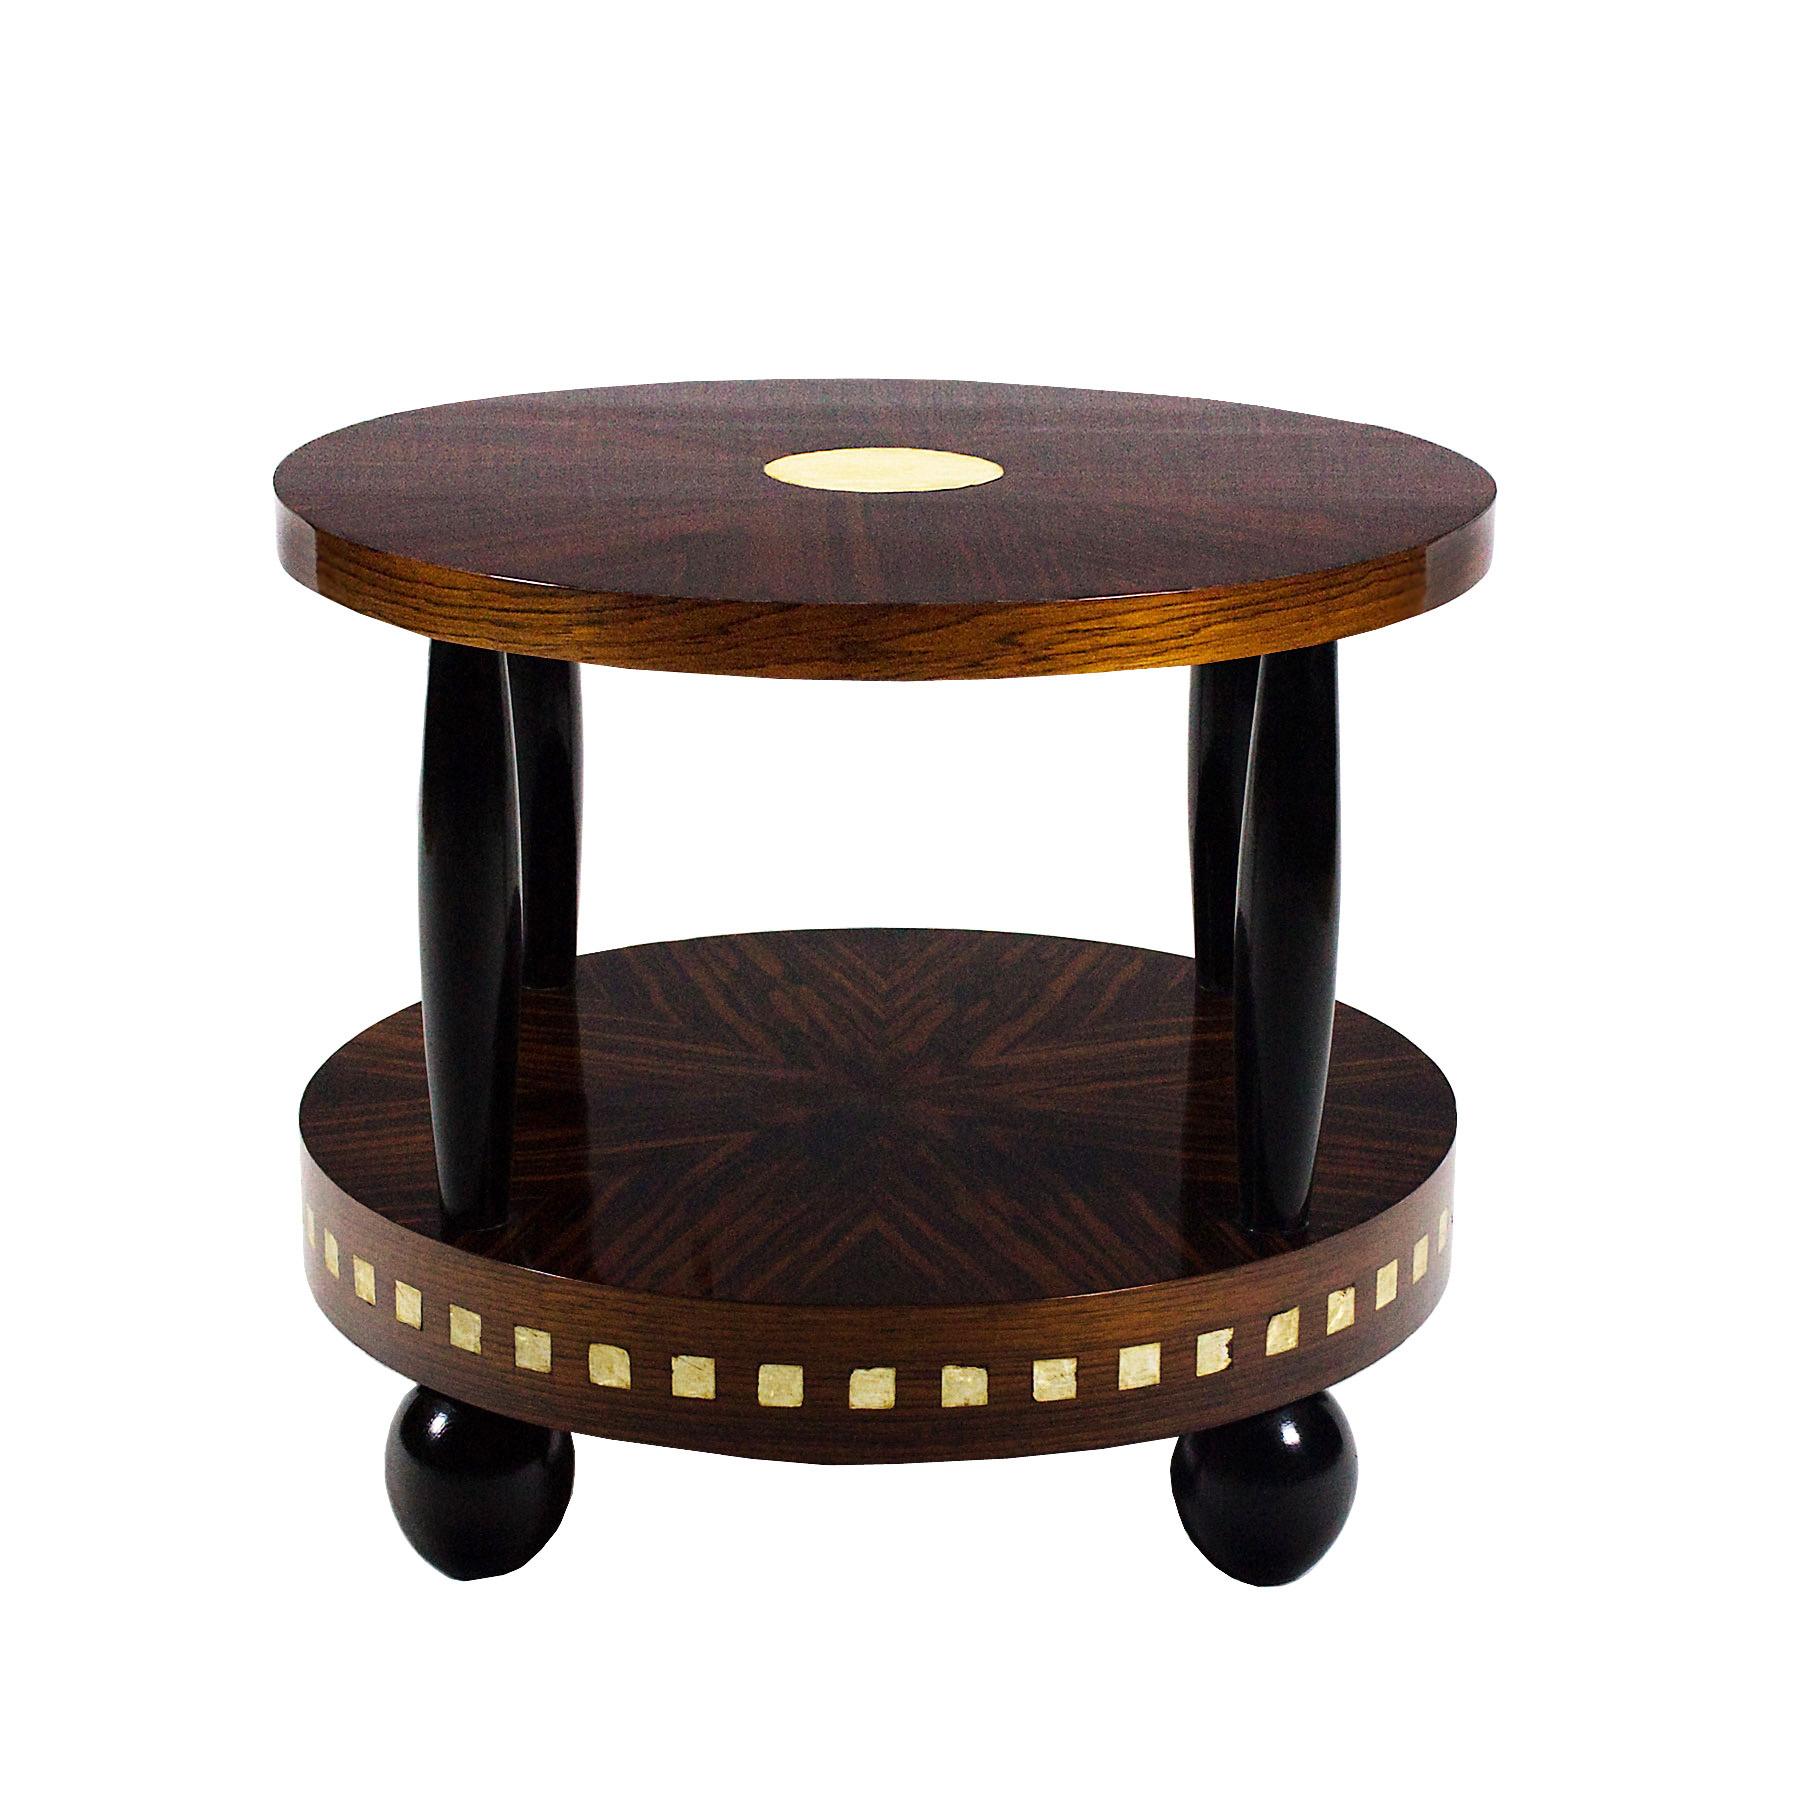 Art Deco solid wood sidetable with Macassar ebony, mahogany and celluloid veneer. Black lacquered solid oak stands and feet.

Design: Francisque Chaleyssin, (1872-1951)

France, 1925.